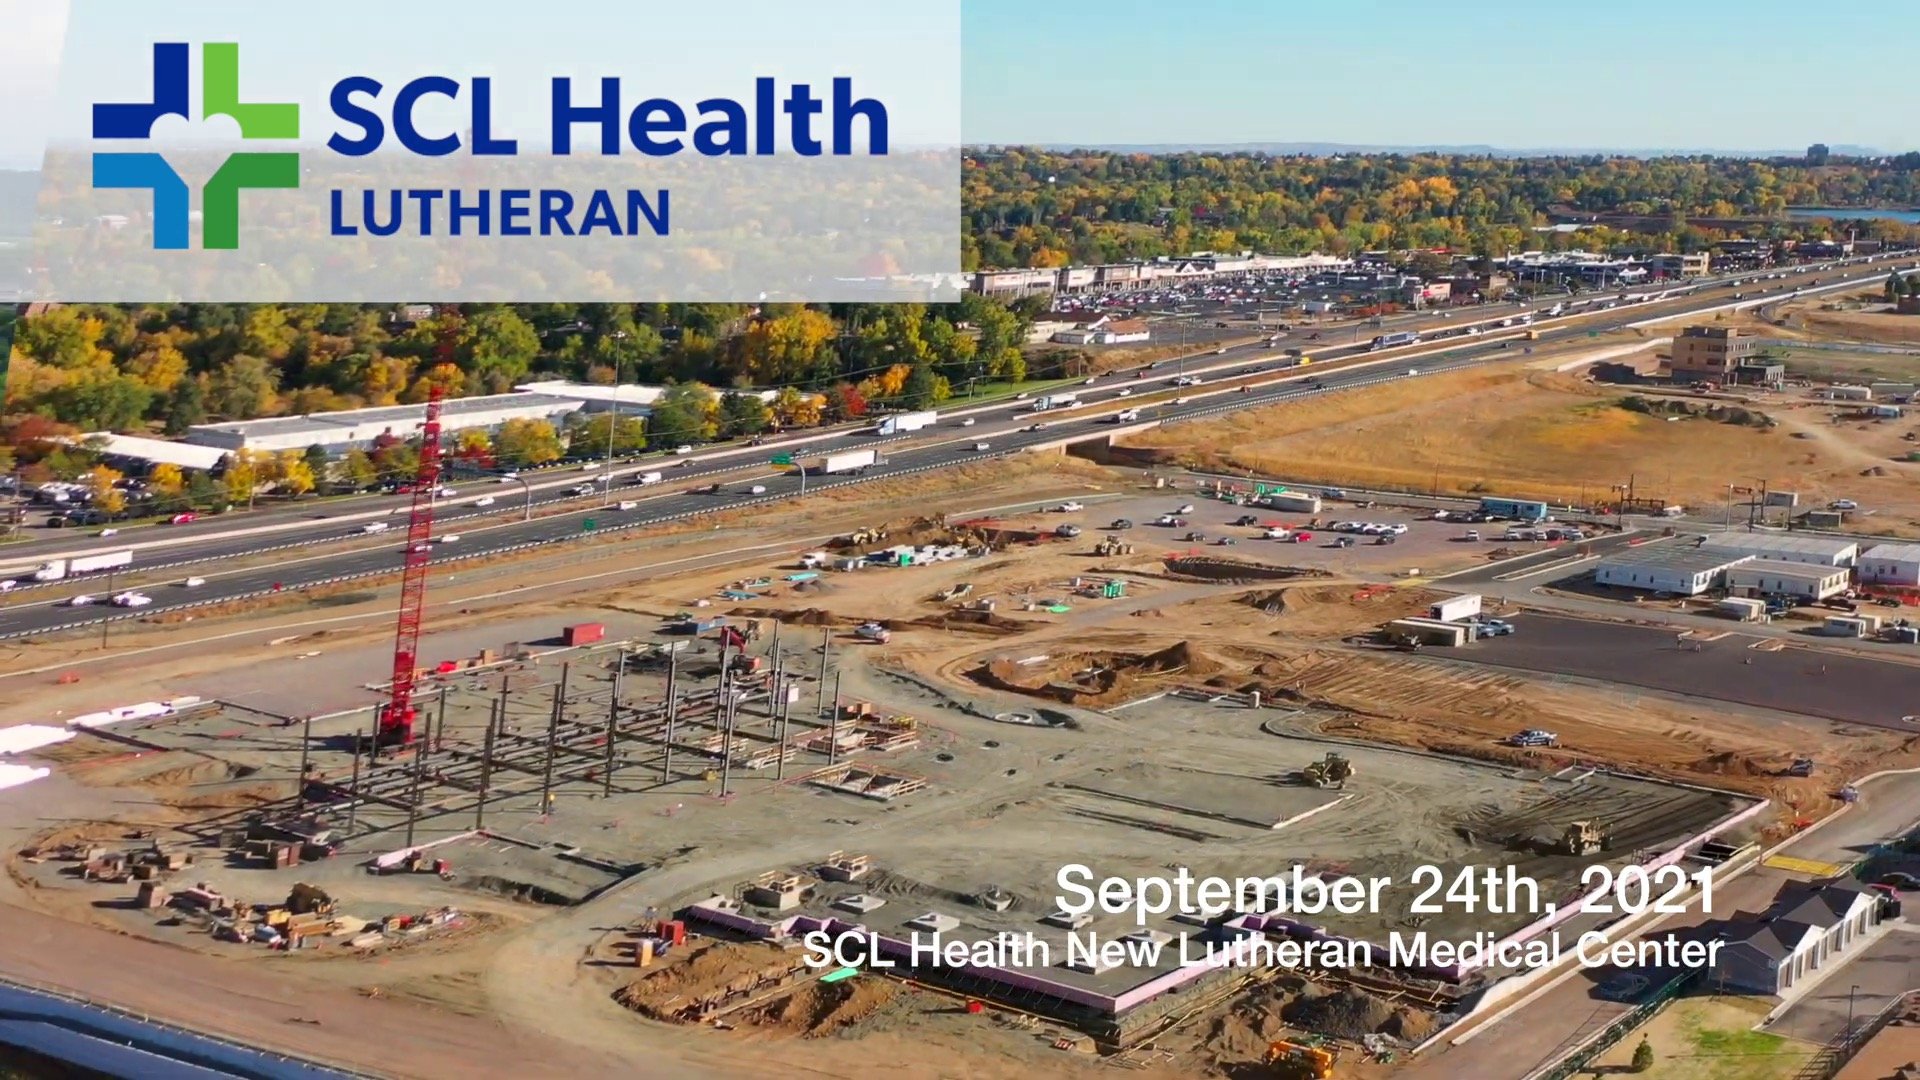 Construction-Entrance-Trackout-Control-Construction-Exit-BMP-VTP-Vehicle-Tracking-Pad-Reusable-Construction-Entrance-Trackout-Control-Mat-System-Installed-At-SCL-Health-Intermountain-Health-0.jpeg